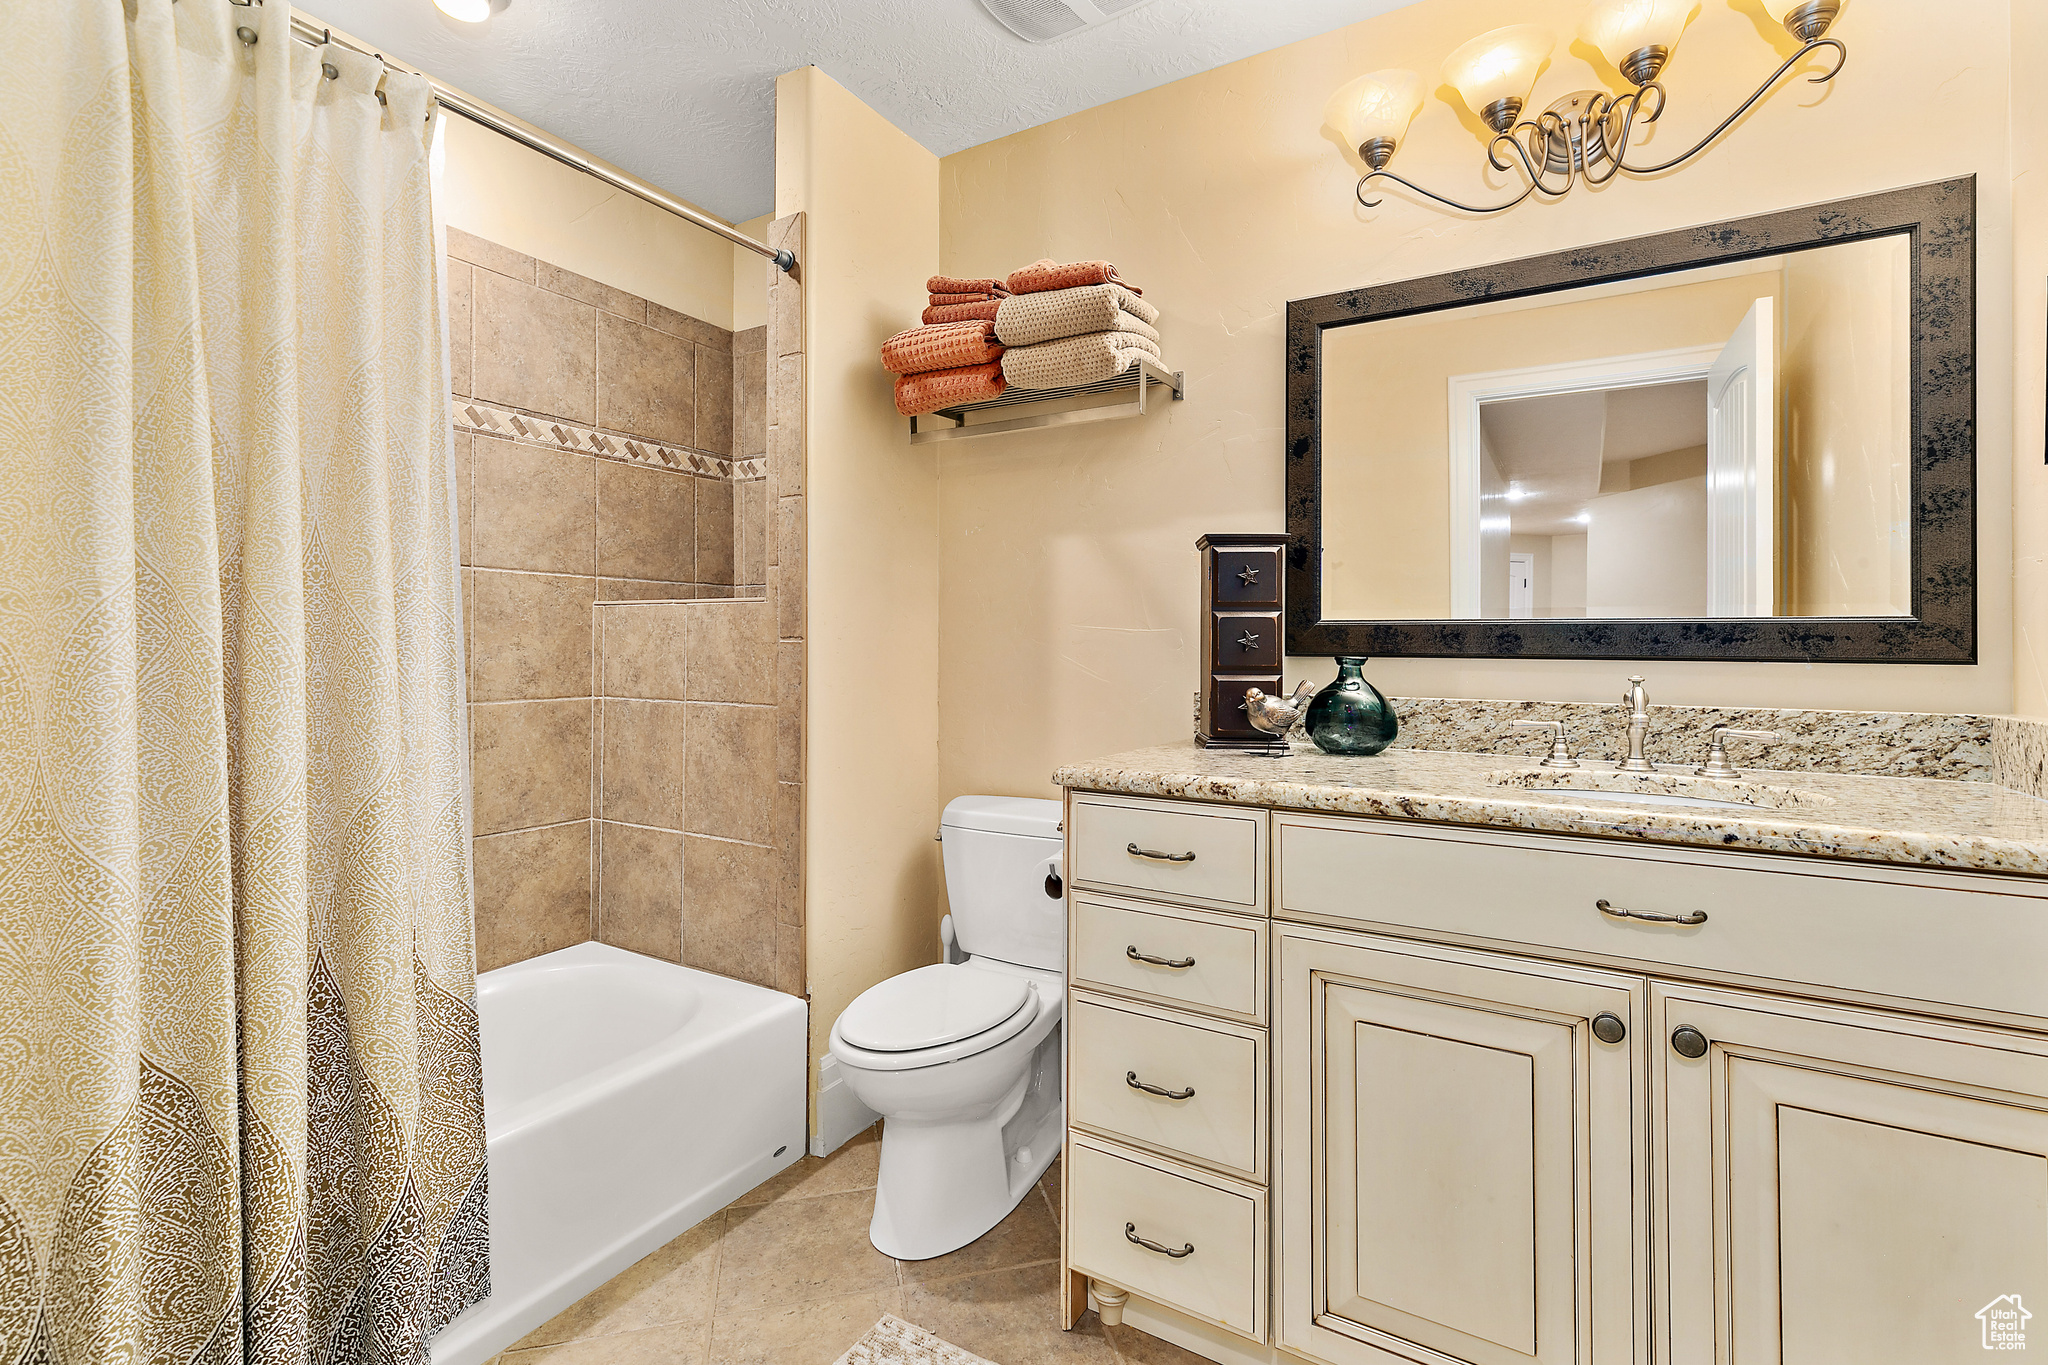 Full bathroom featuring shower / bath combo with shower curtain, a textured ceiling, tile floors, toilet, and vanity